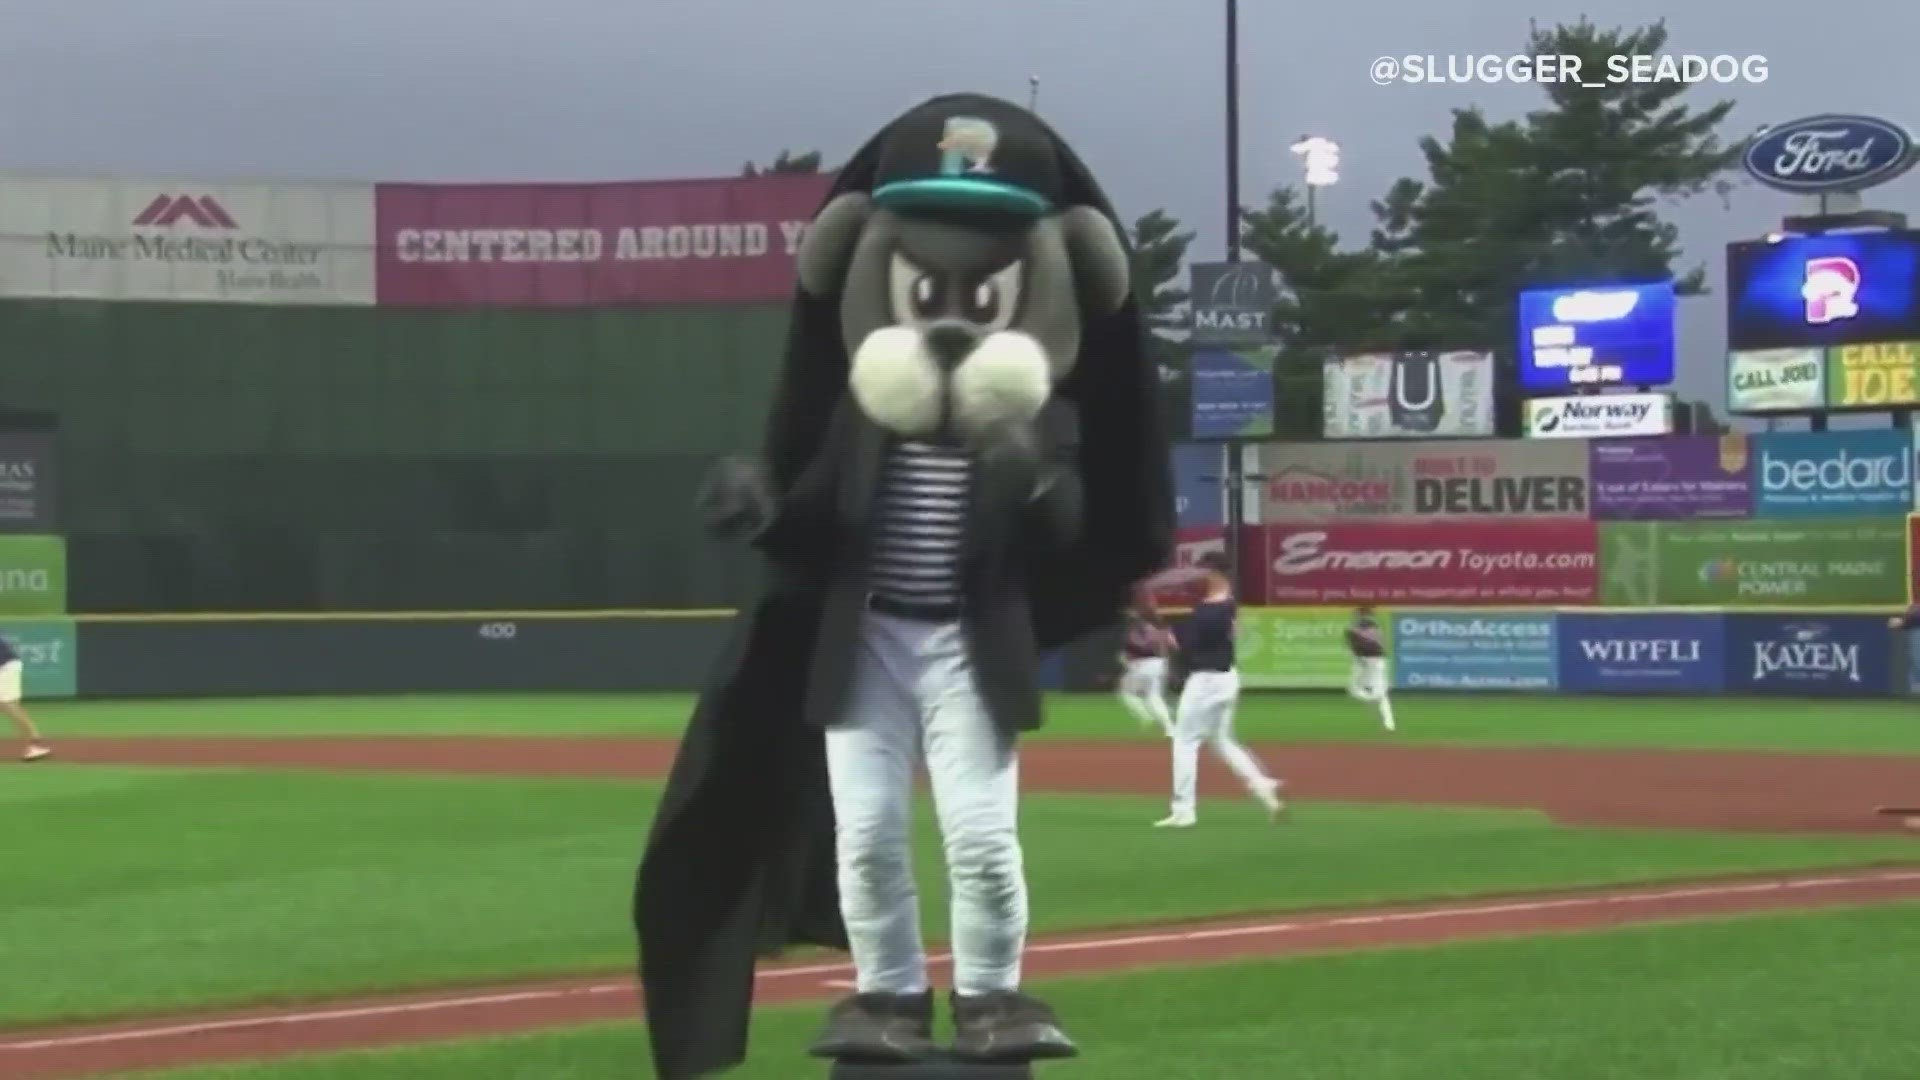 Slugger was among 18 other mascots nominated and was the only one from Minor League Baseball.